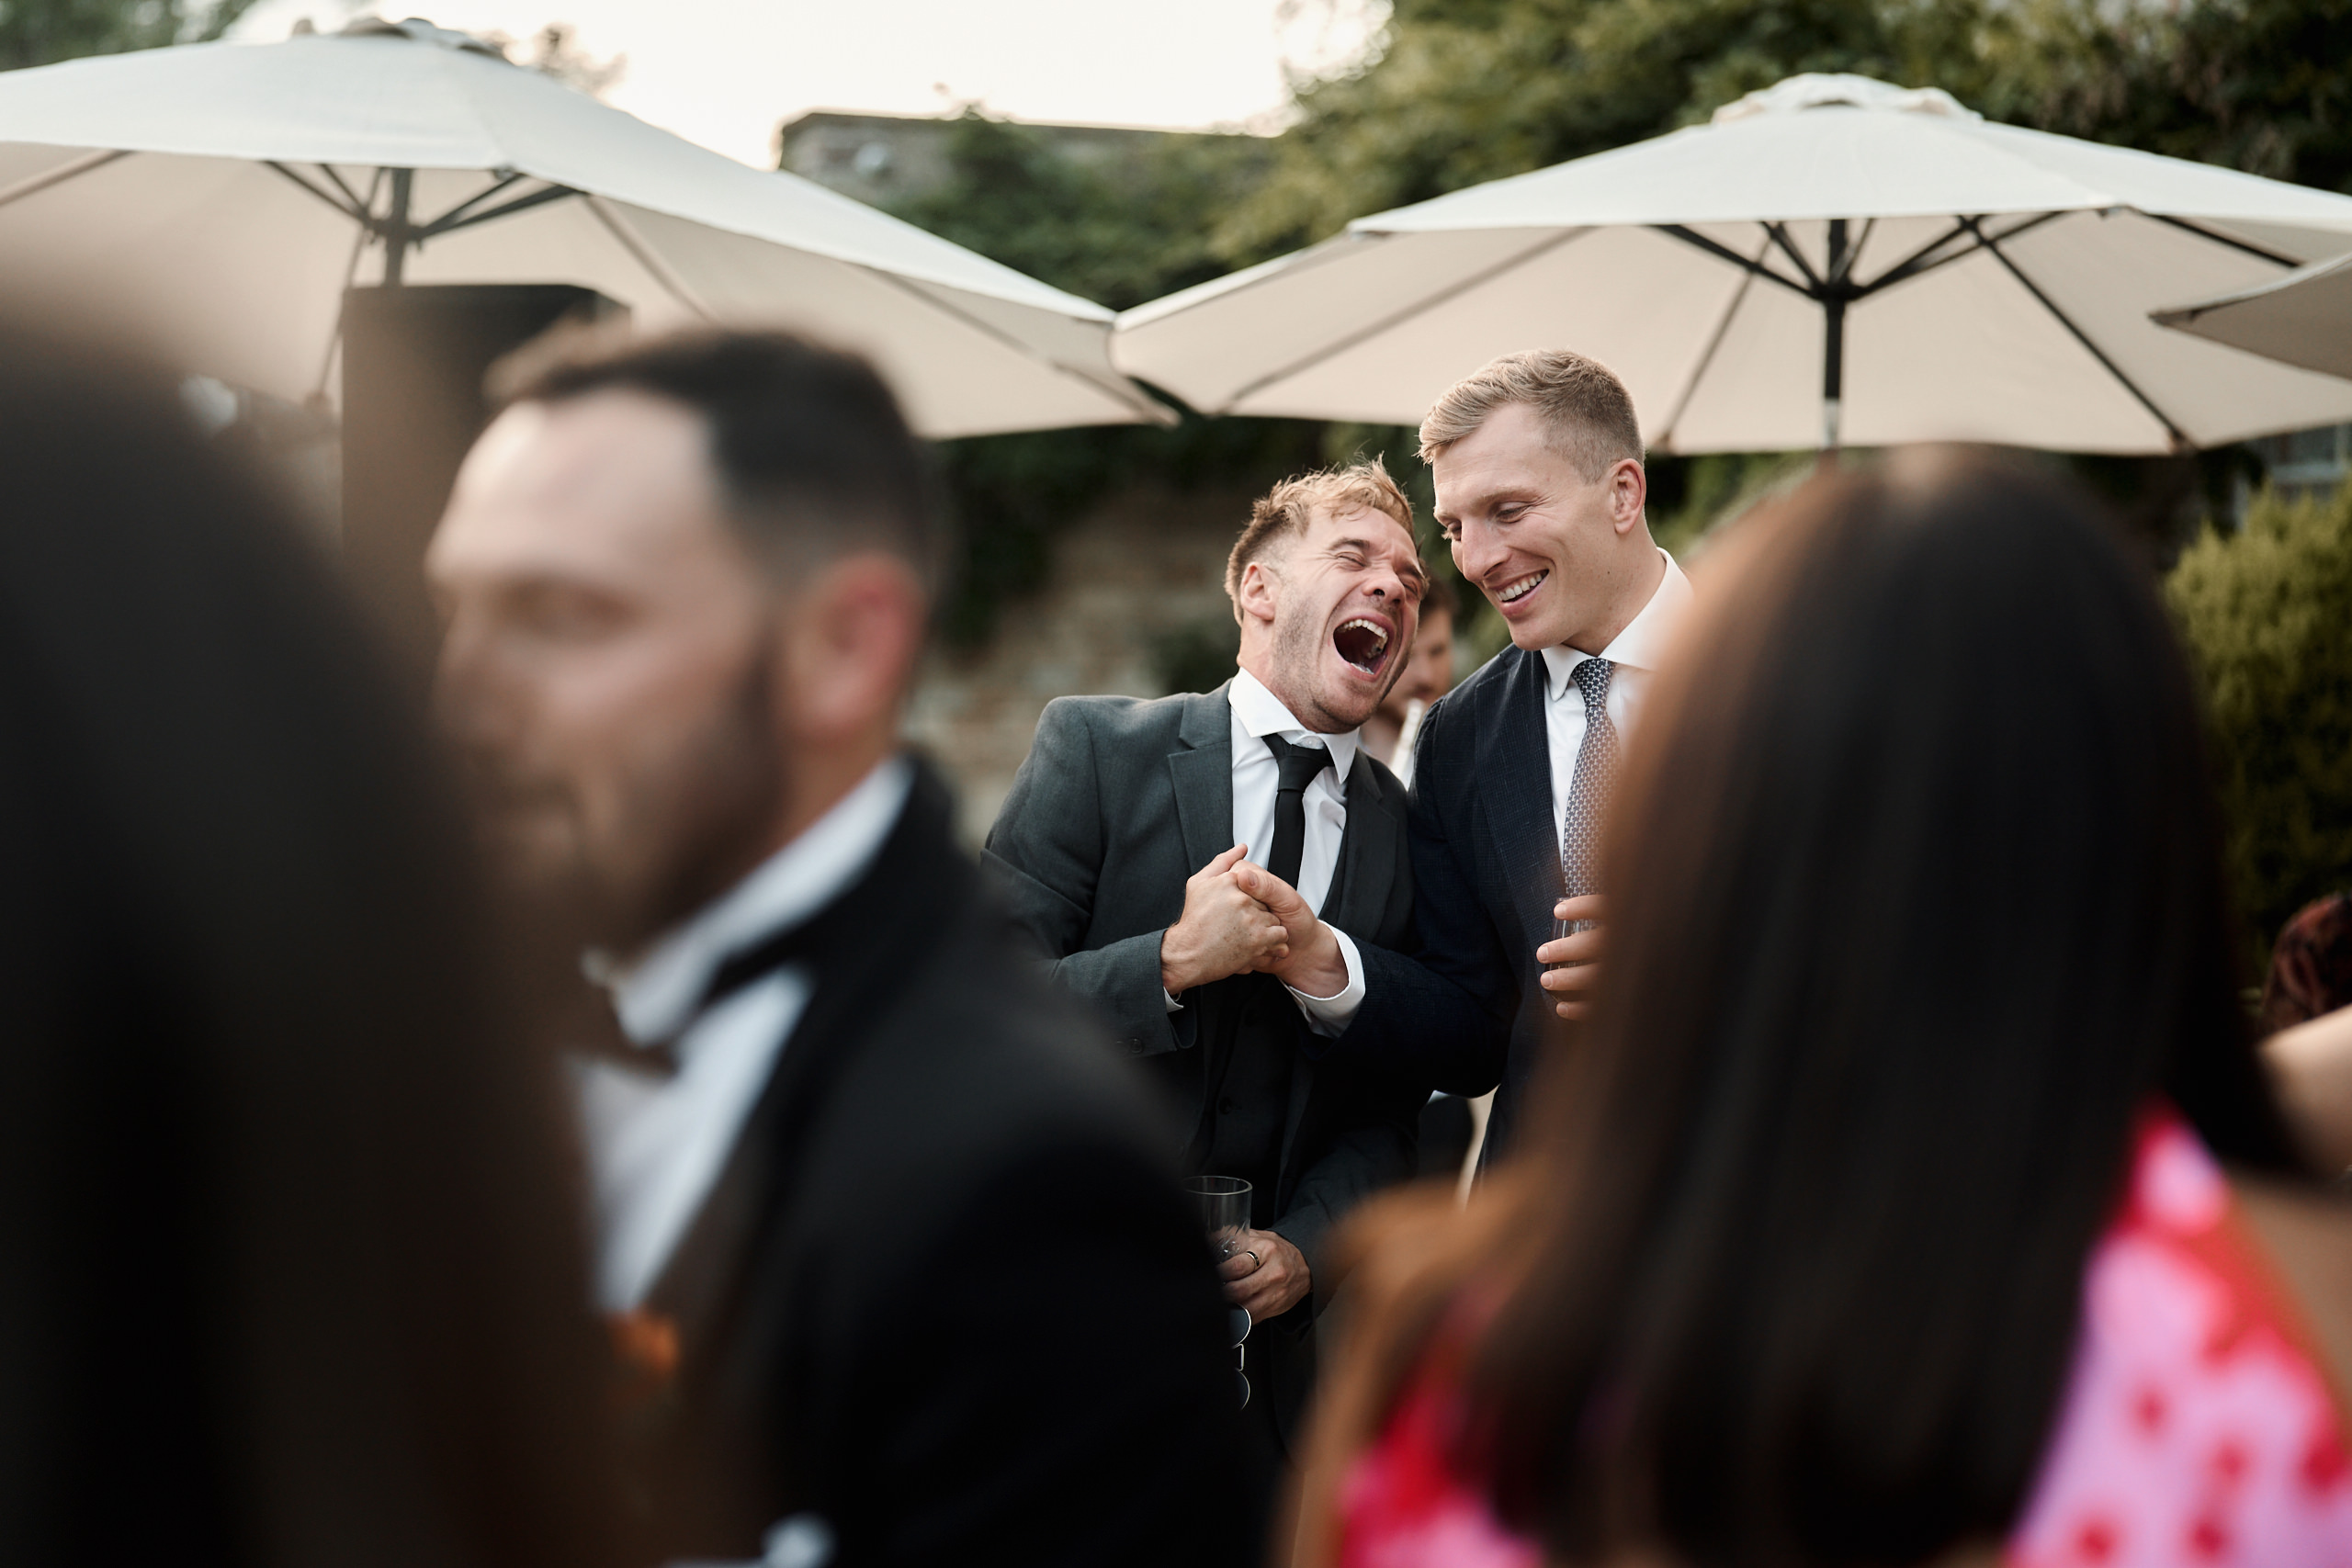 A group of men laughing at a wedding reception.